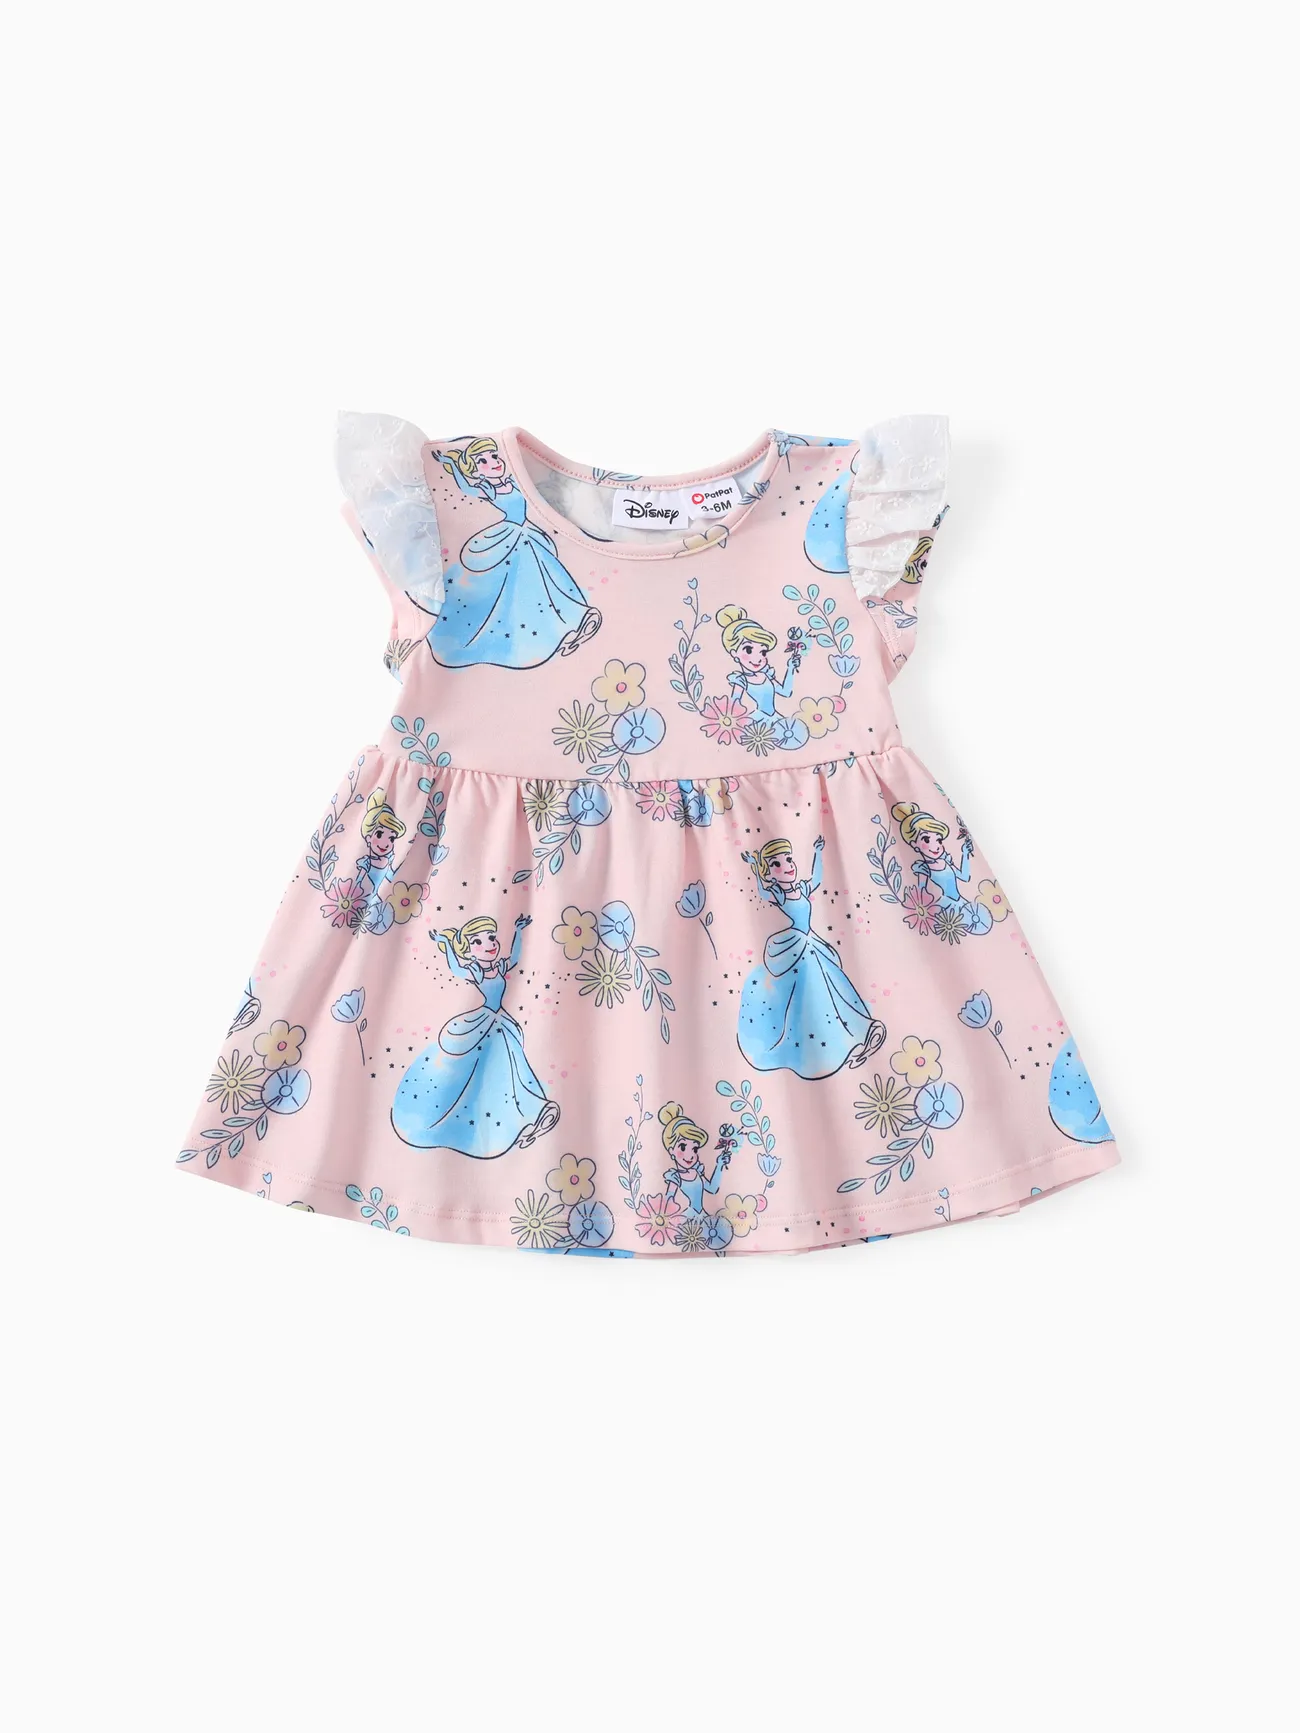 Disney Princess Baby/Toddler Girls Ariel/Belle/Snow White 1pc Naia™ Character All-over Print Lace Ruffled-sleeve Dress Pink big image 1